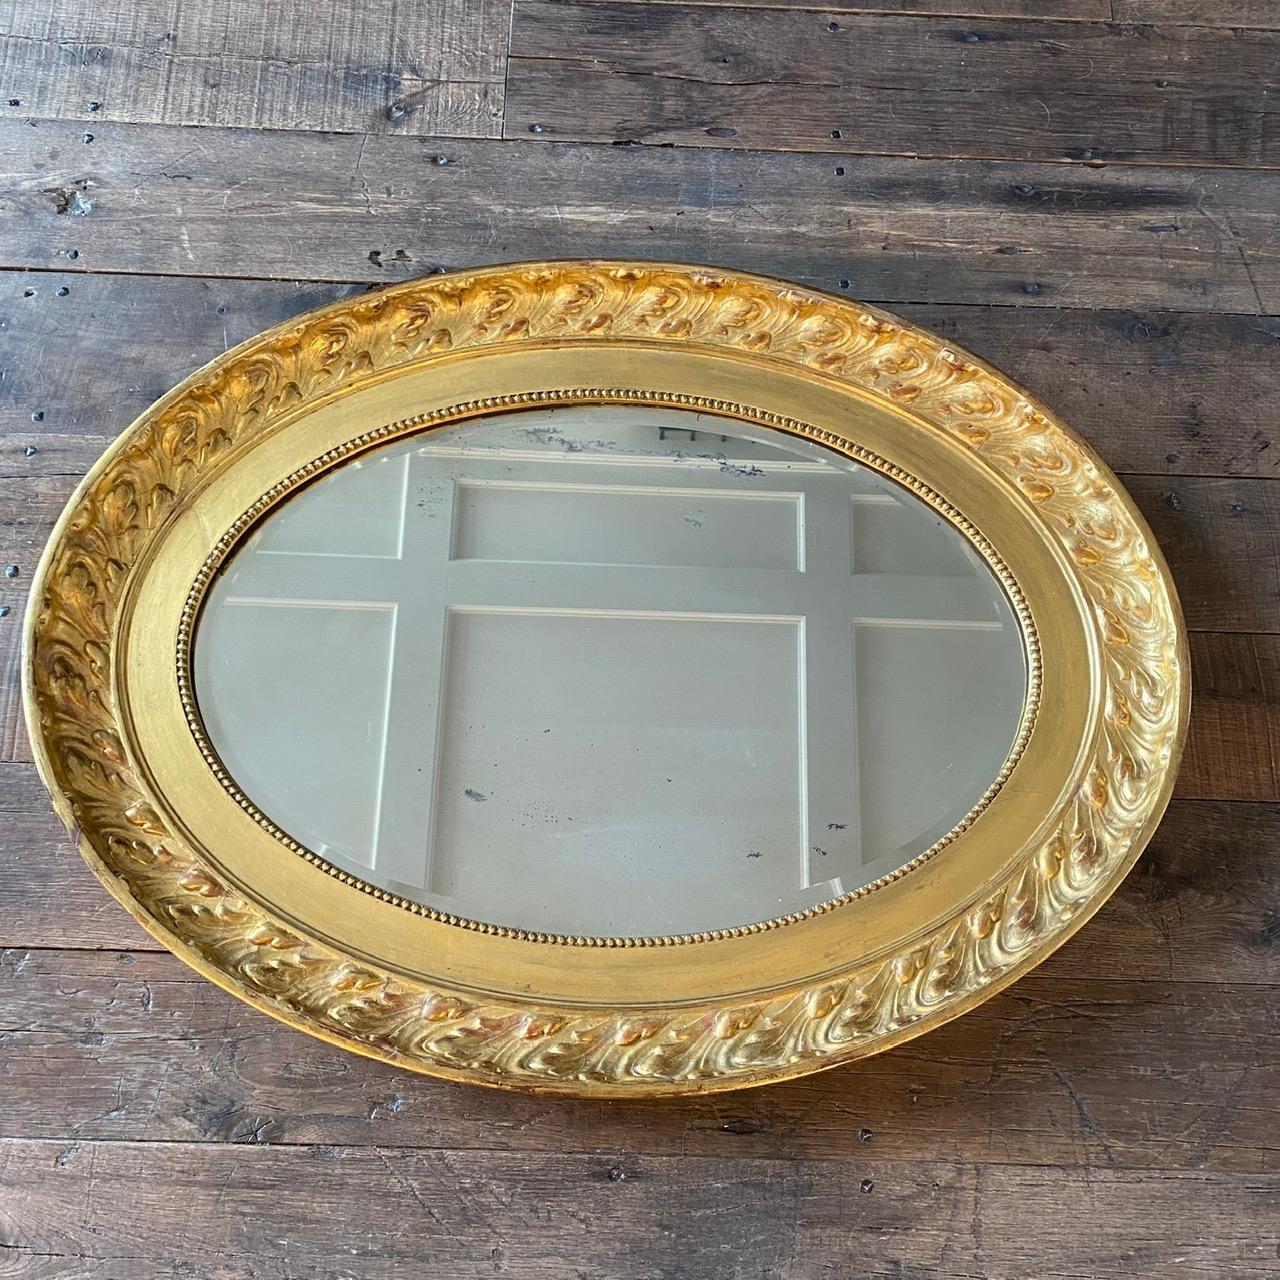 This is a gorgeous mirror with genuine and bright gold leaf finish, which has hints of Italian red bole clay ground behind the gold leaf. The mirror plate is clean and clear. Can be hung both vertically and horizontally. #5654

.